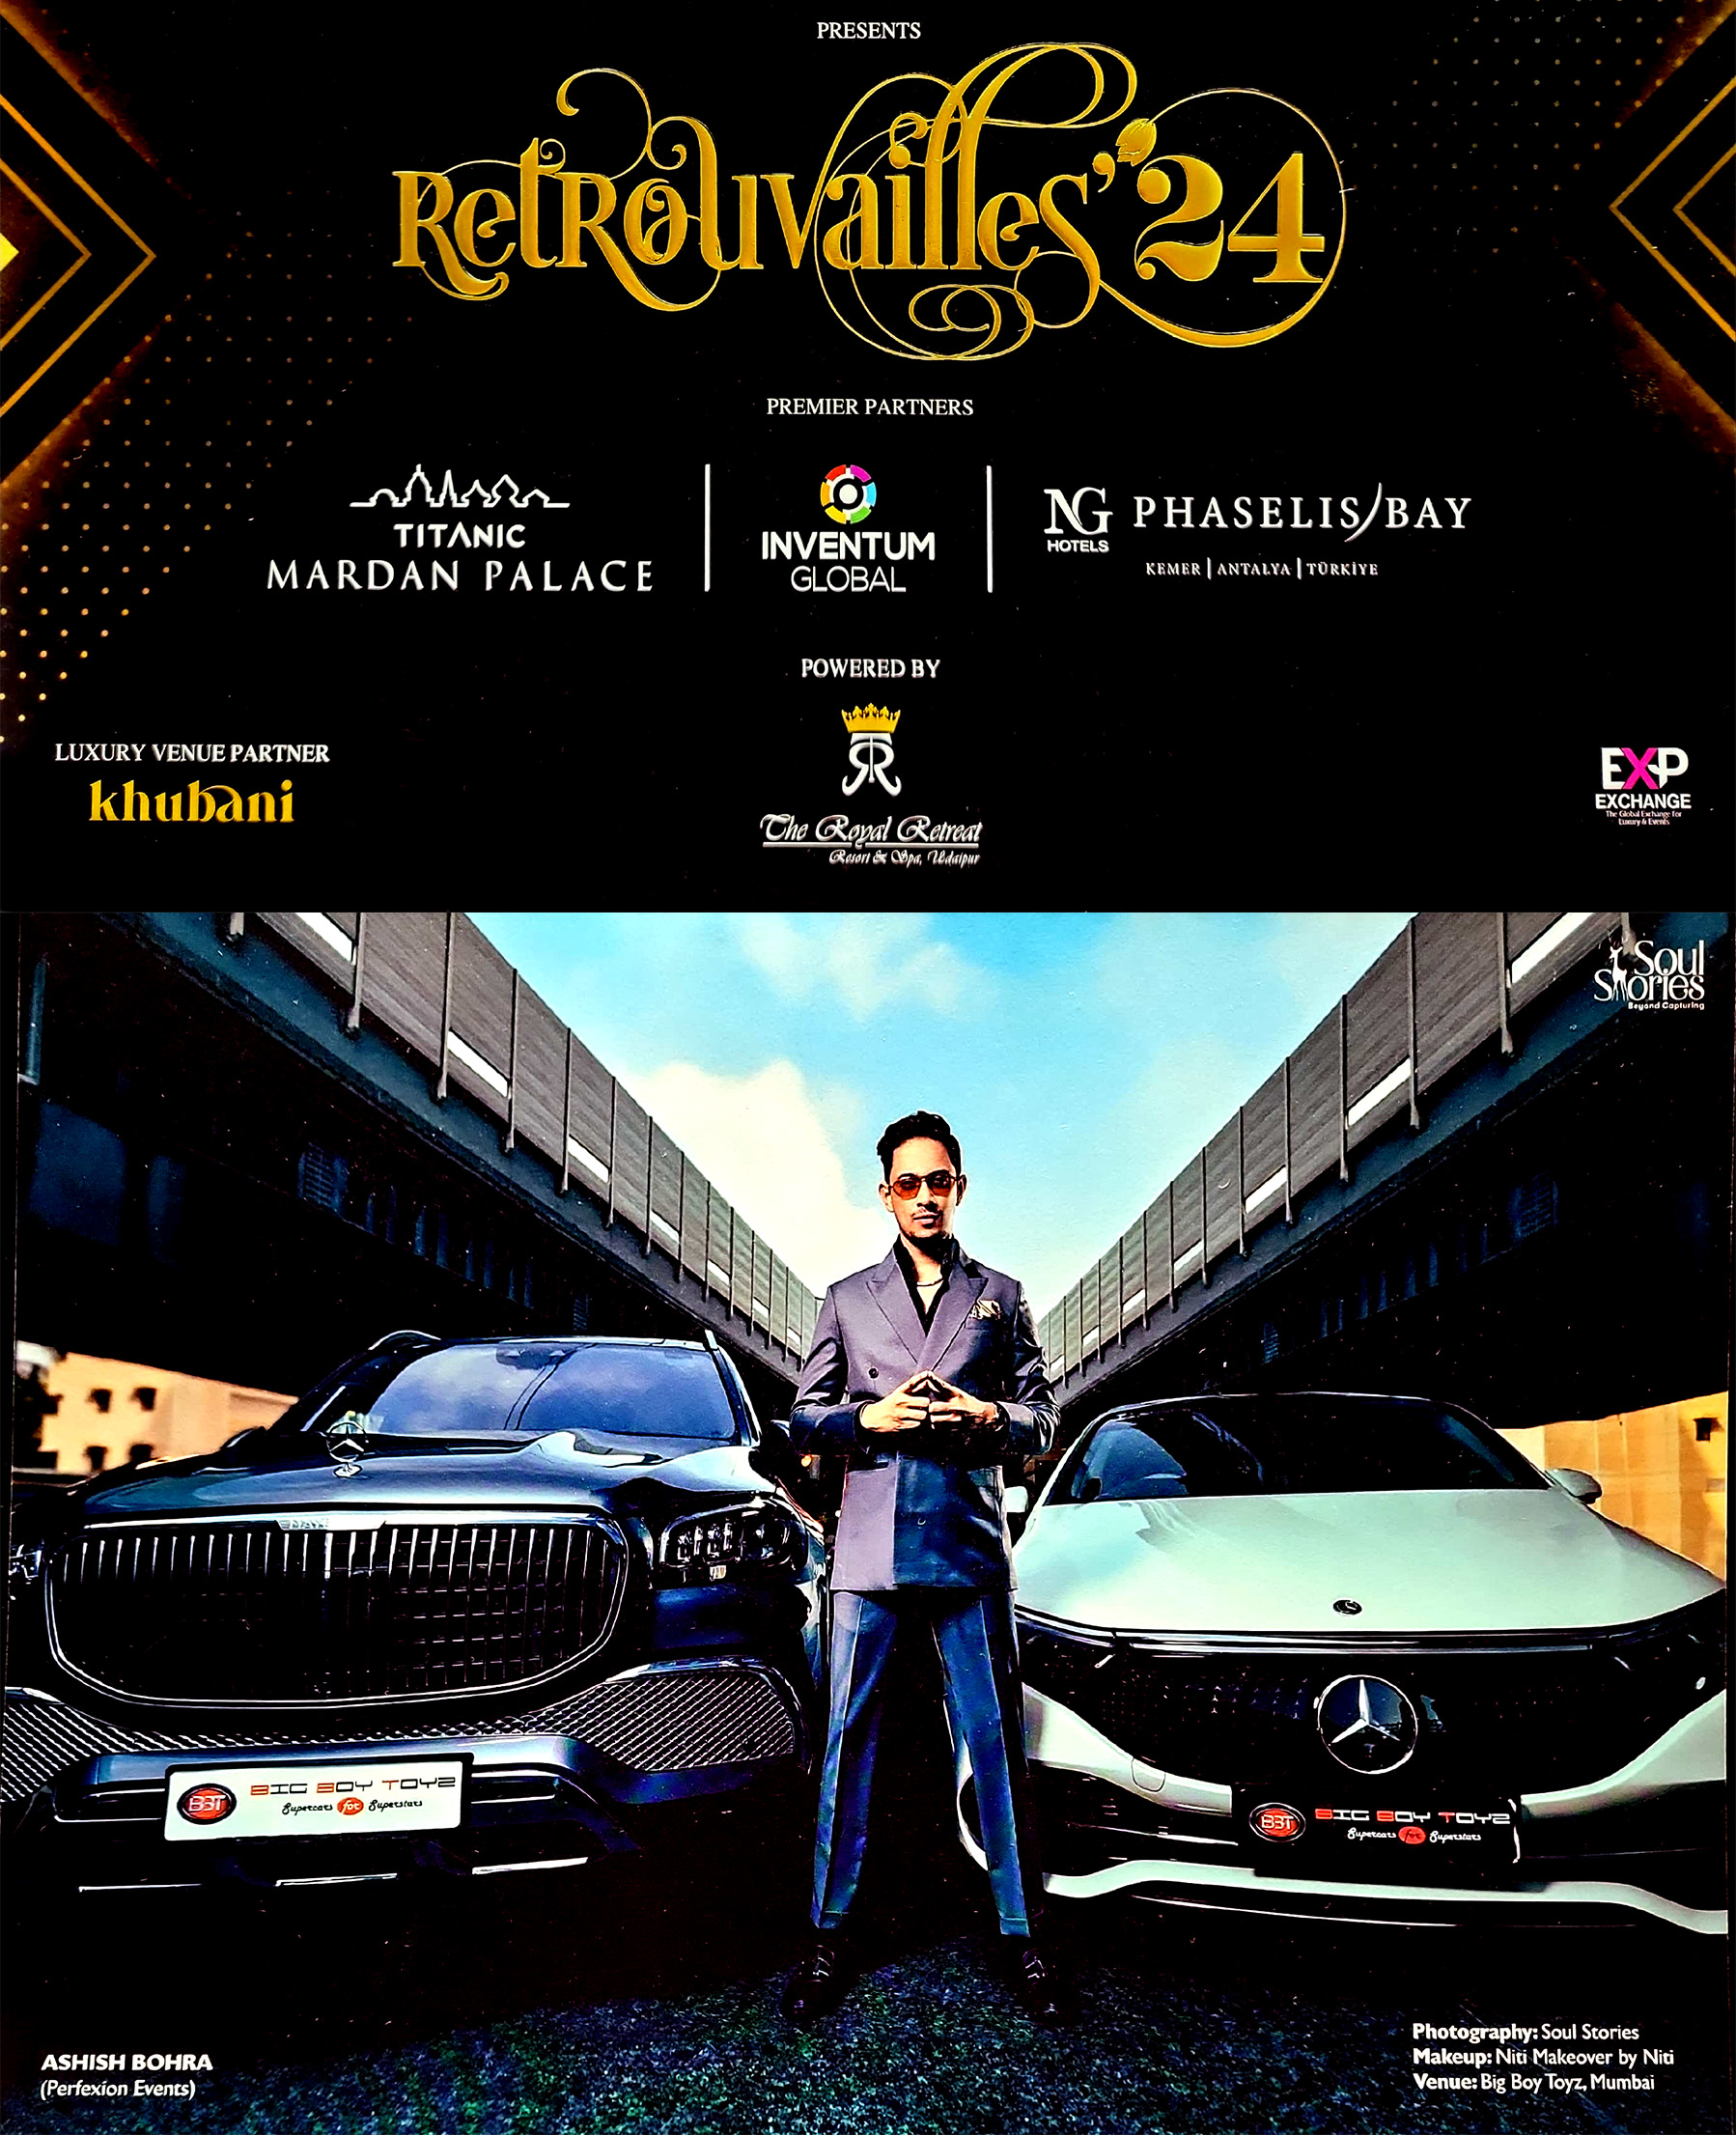 Launch of Retrouvailles Calender 2024, held at Khubani, Delhi featured our director Mr. Ashish Bohra Image